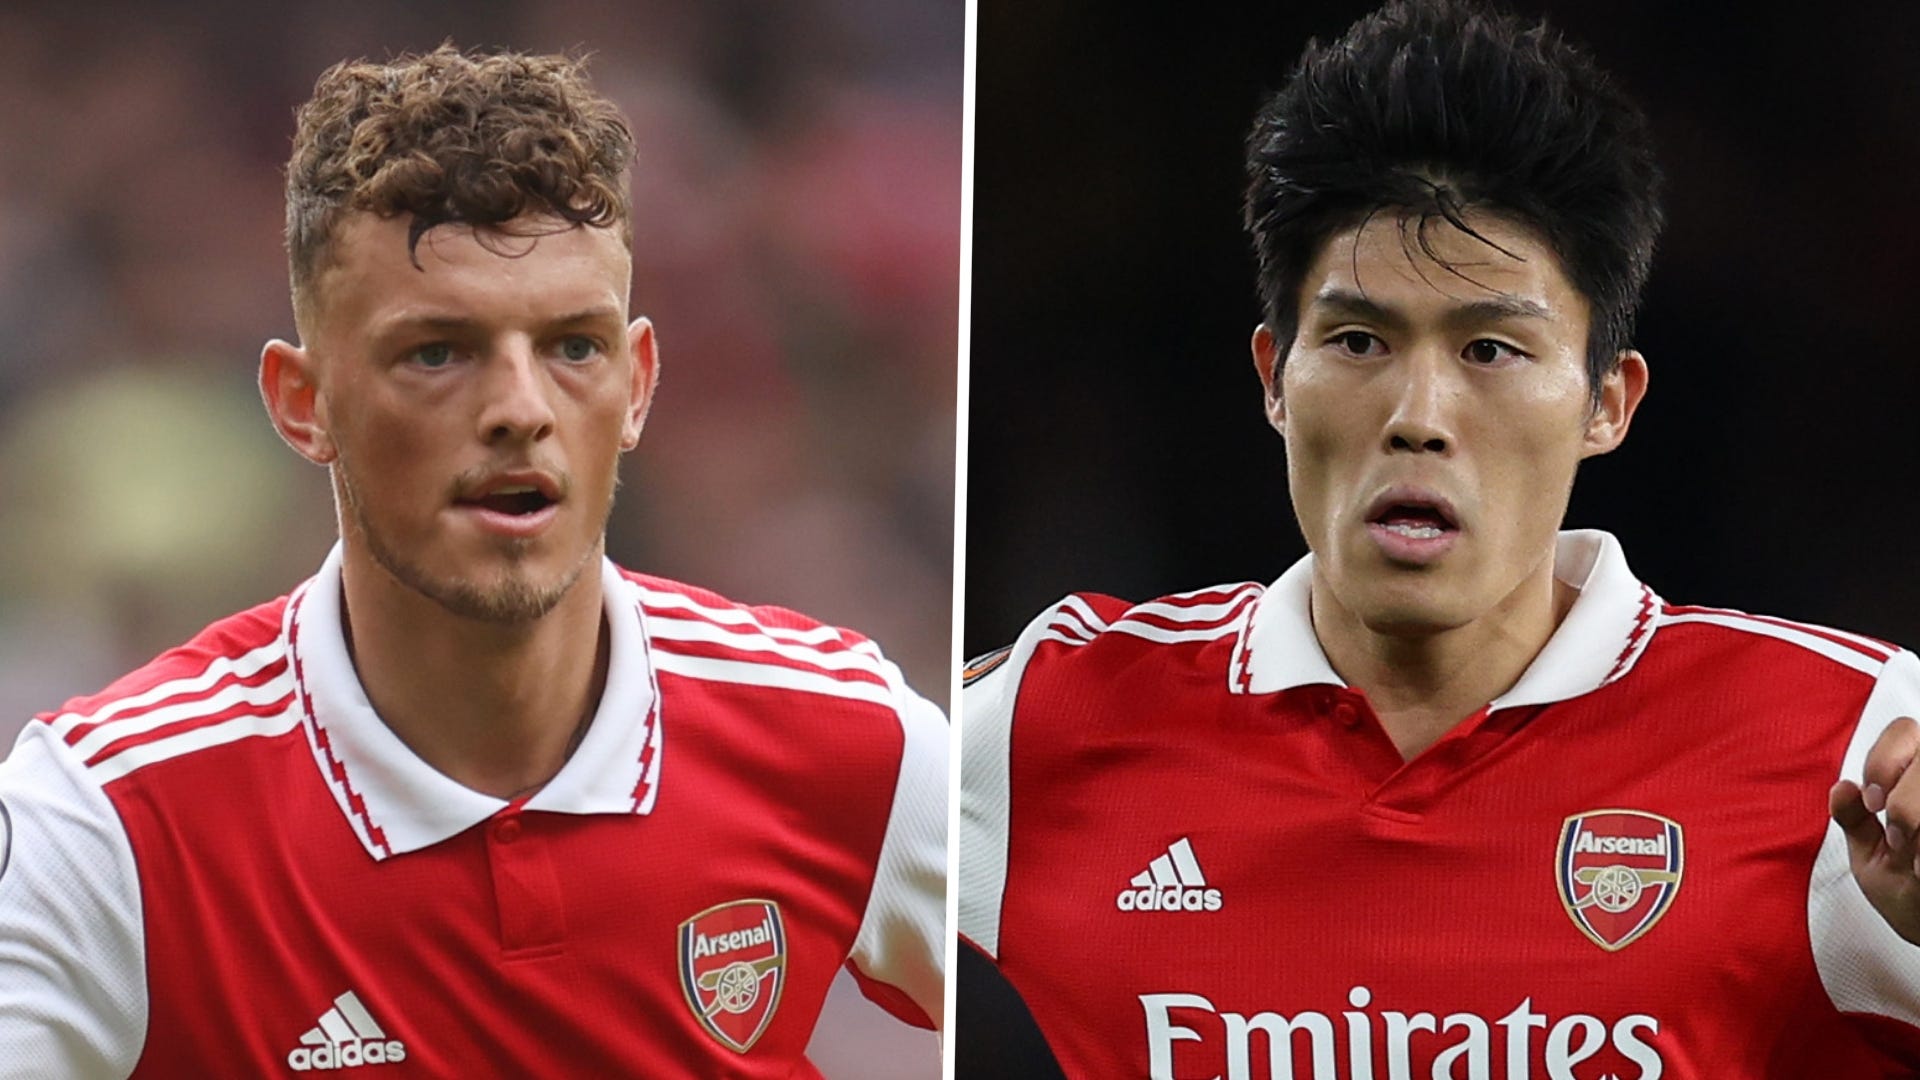 "He Has Had The Most Impact For Arsenal", Takehiro Tomiyasu Names The £120,000-PER-WEEK Player As The Most Important Player For Arsenal